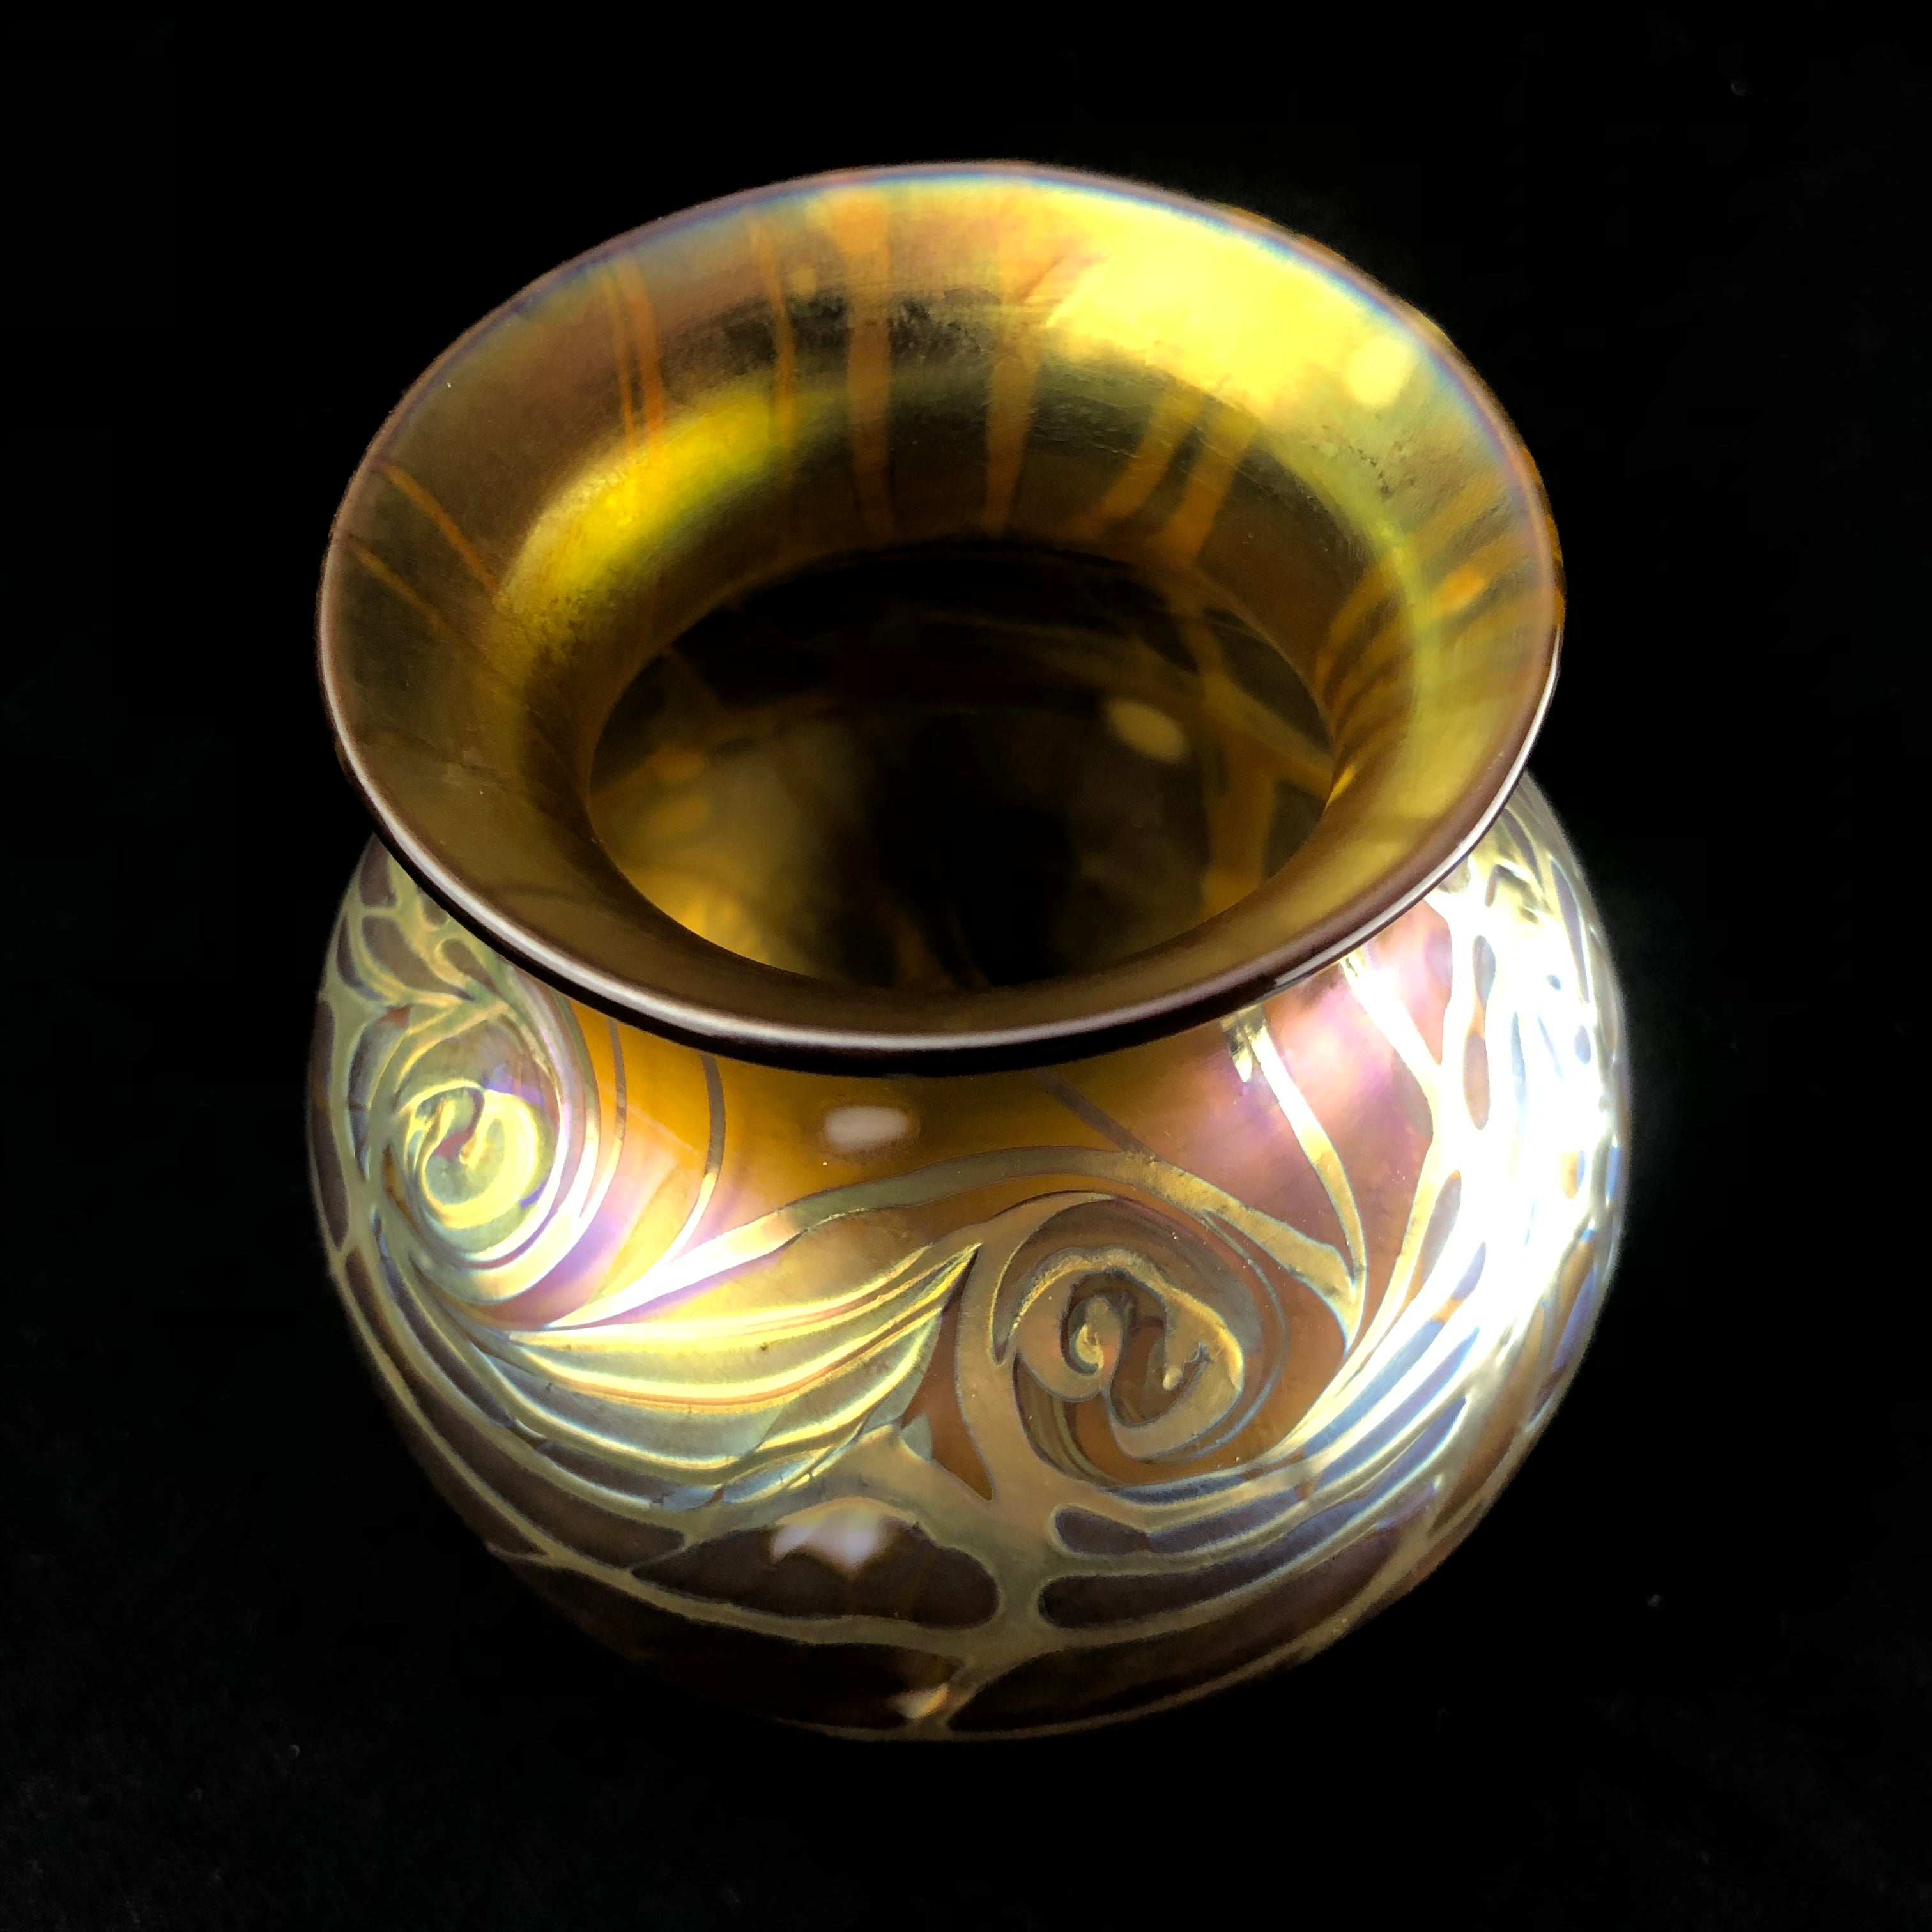 Top view of Amber Starry Night Vase